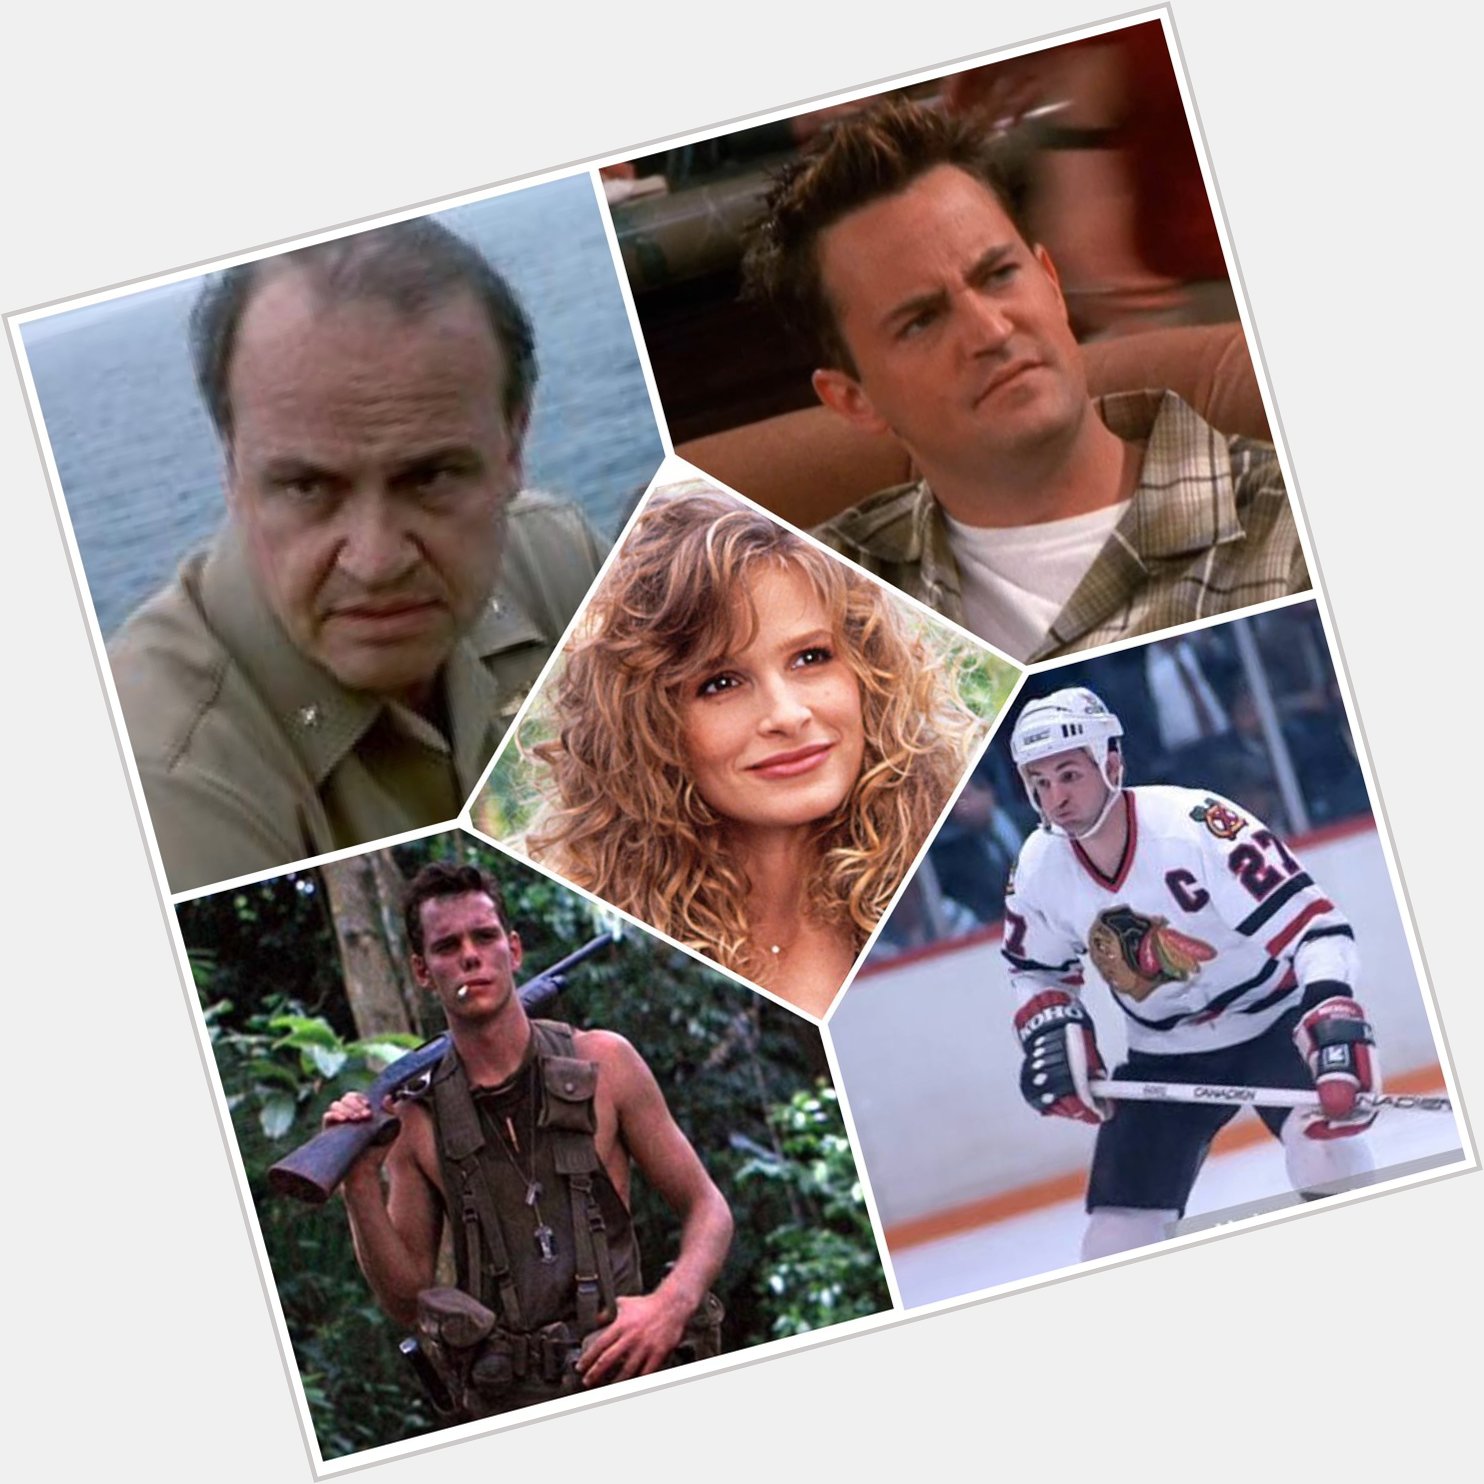 Happy Birthday to 

Matthew Perry
Kyra Sedgwick 
Darryl Sutter
Kevin Dillon 
And the late great 
Fred Thompson 